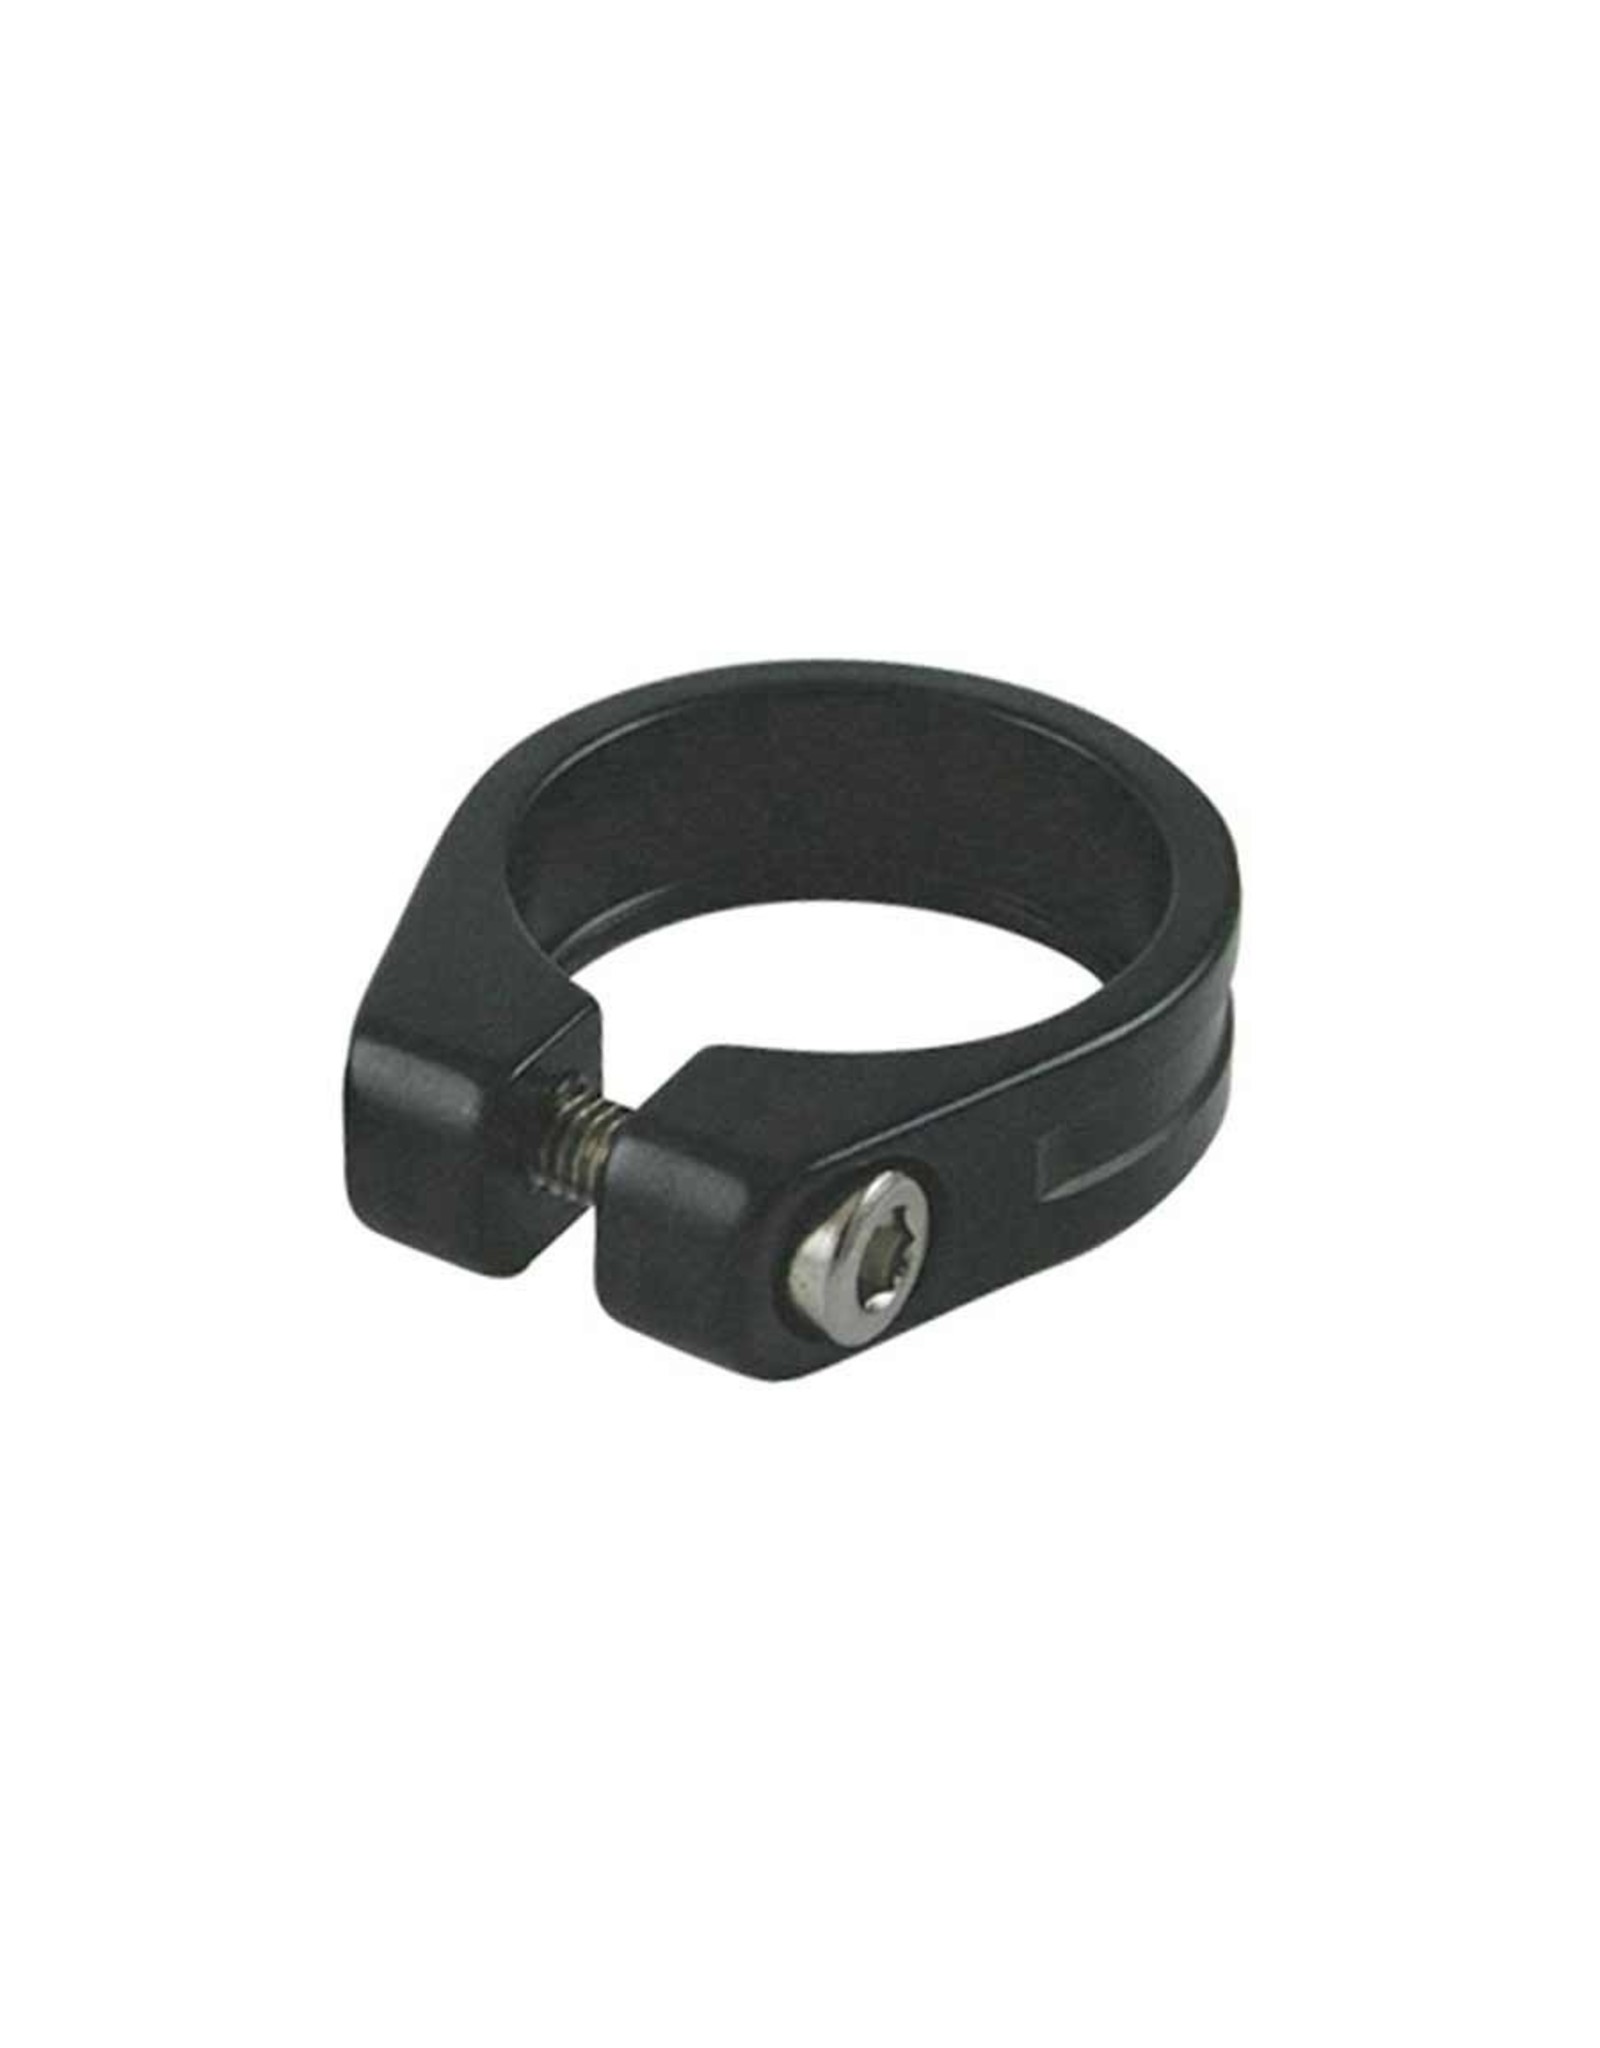 EVO EVO, Seatpost clamp with integrated bolt, 31.8mm, Black